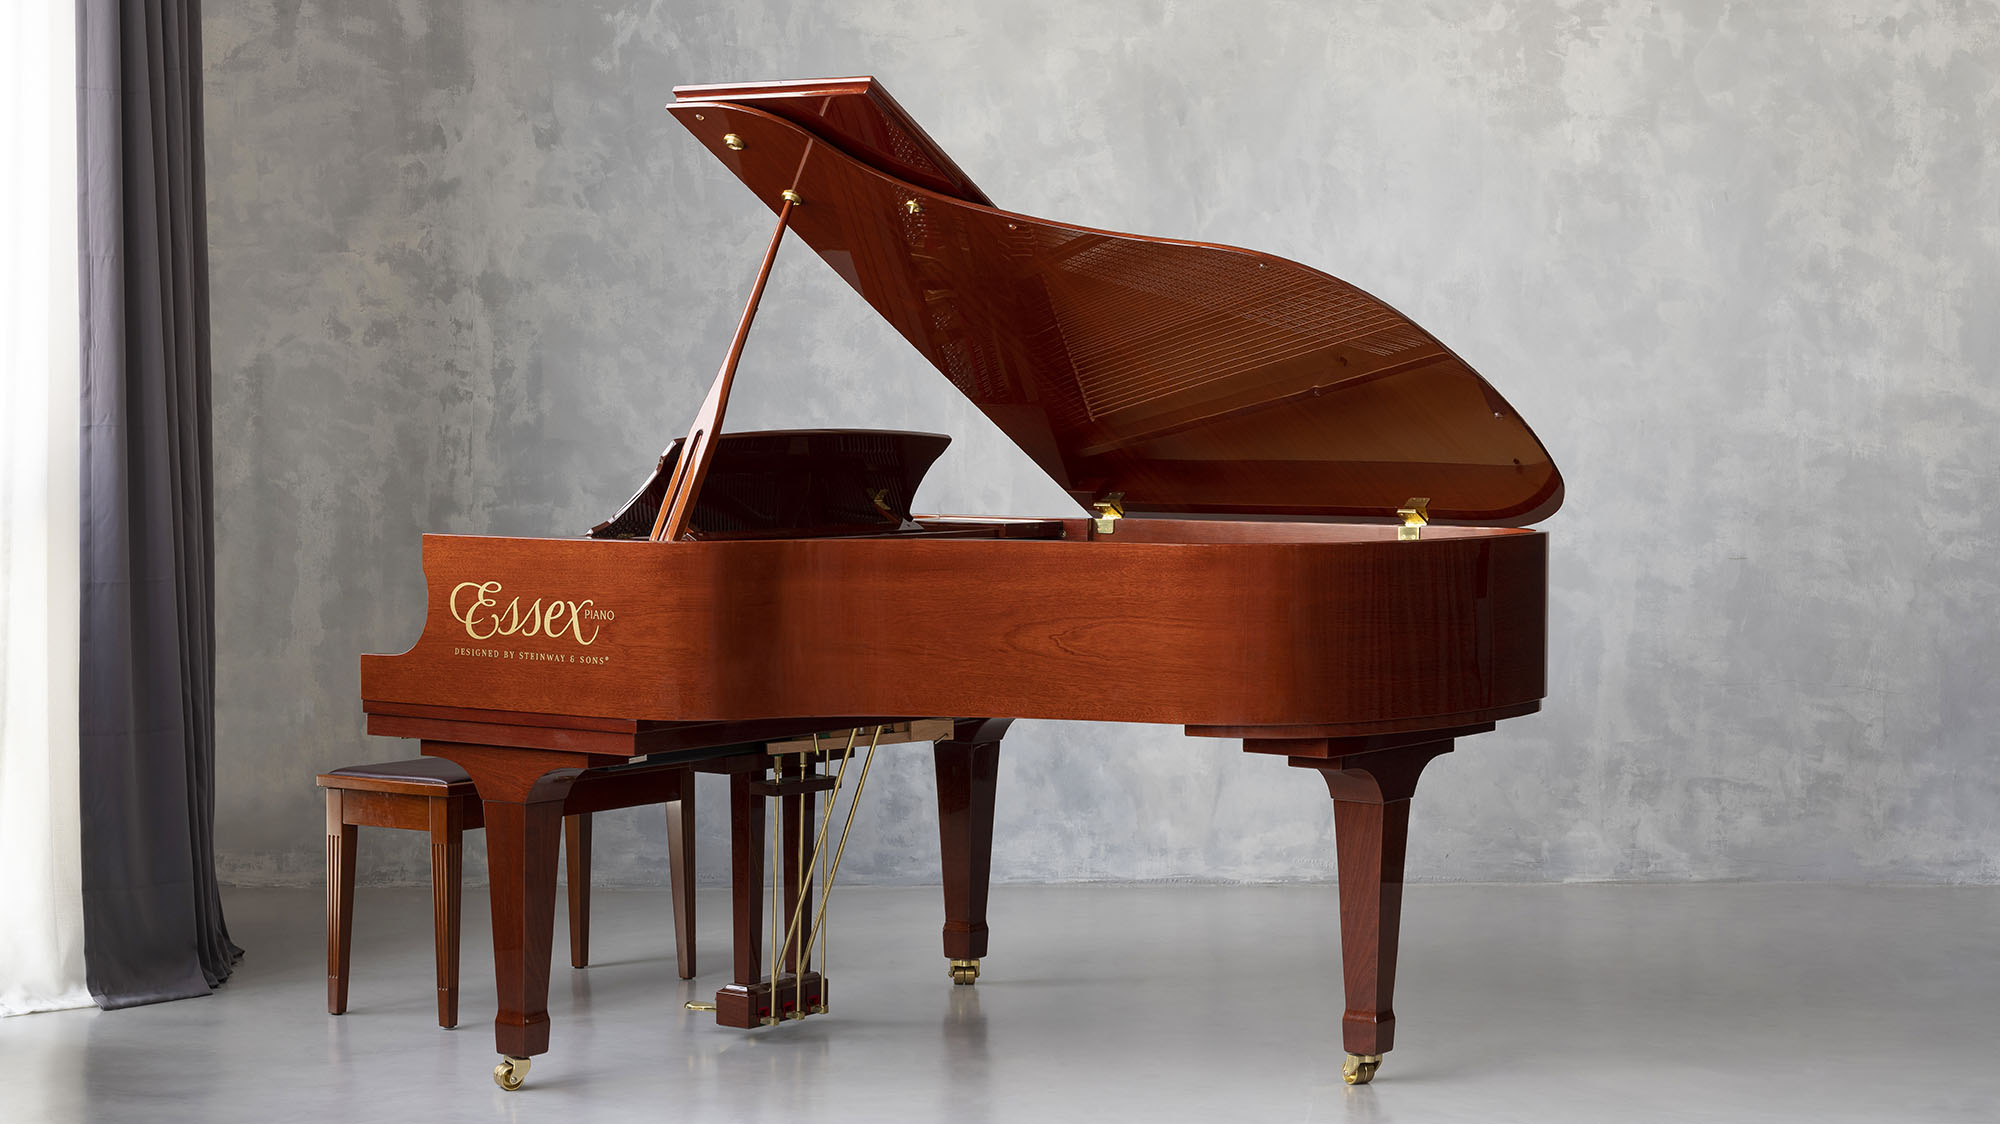 commercial photography for steinway pianos